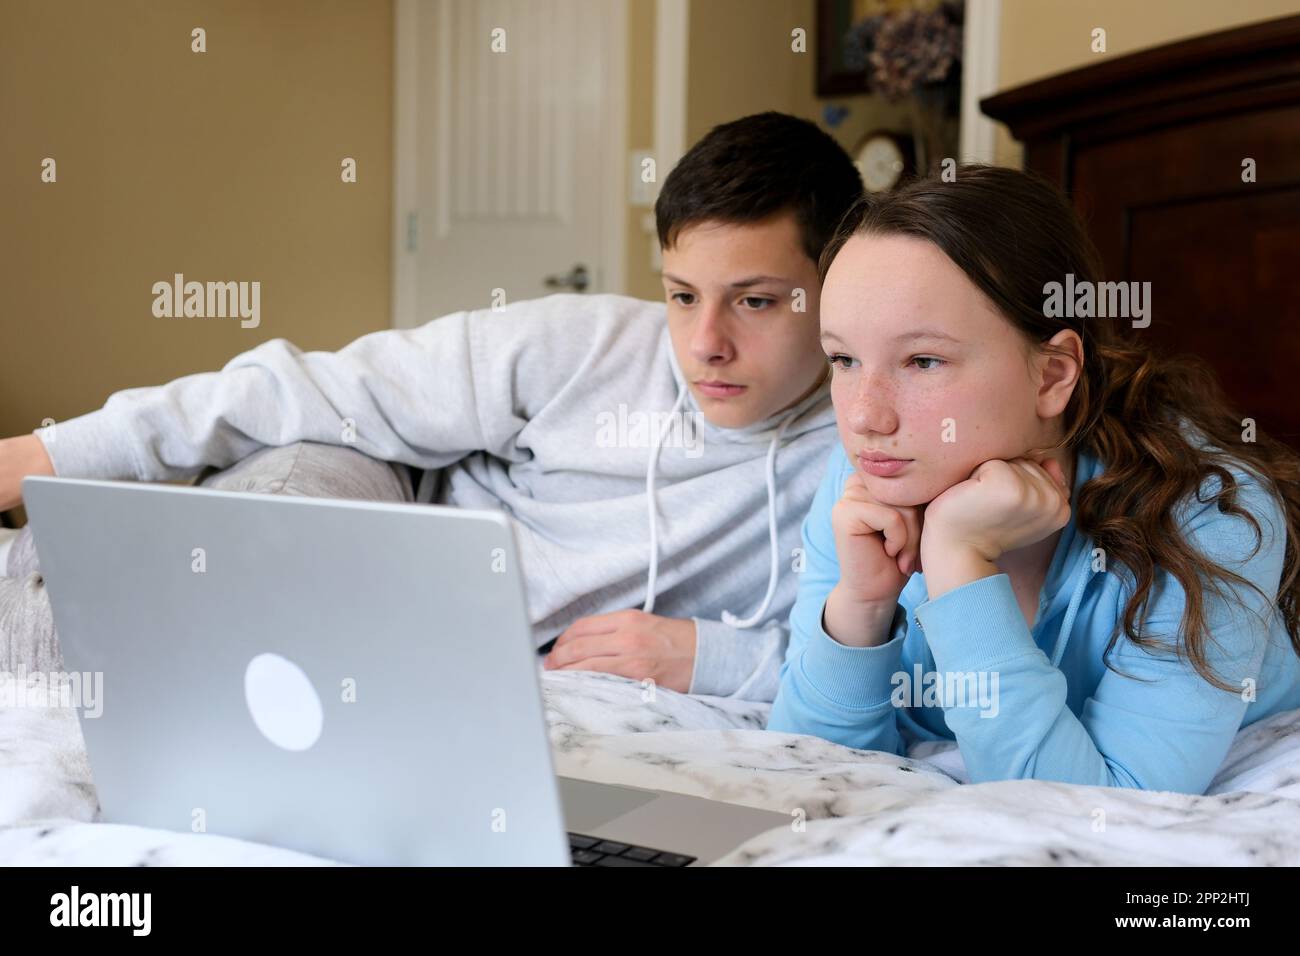 Overjoyed Kids sister brother laughing spend weekend free time together at home on couch bed eating popcorn. teen children watching video cartoon use remote control on laptop have fun Stock Photo